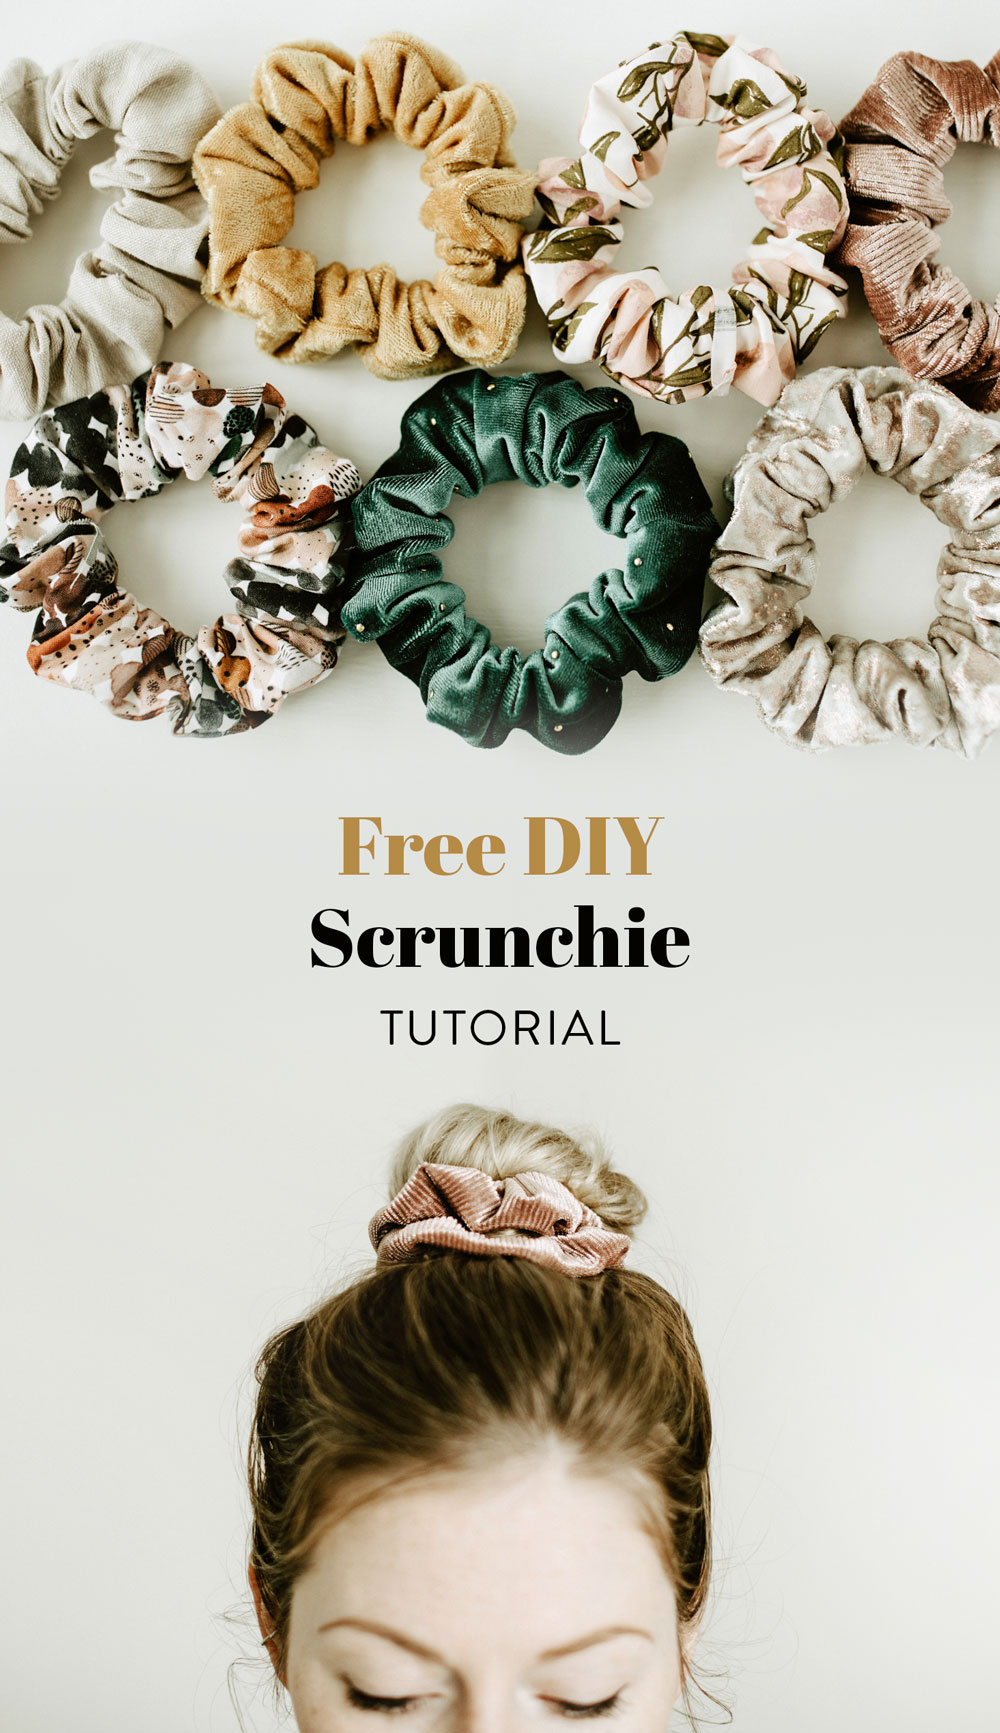 This easy DIY scrunchie tutorial is perfect for kids sewing! Use velvet and make a holiday scrunchie. suzyquilts.com #scrunchietutorial #diysewing